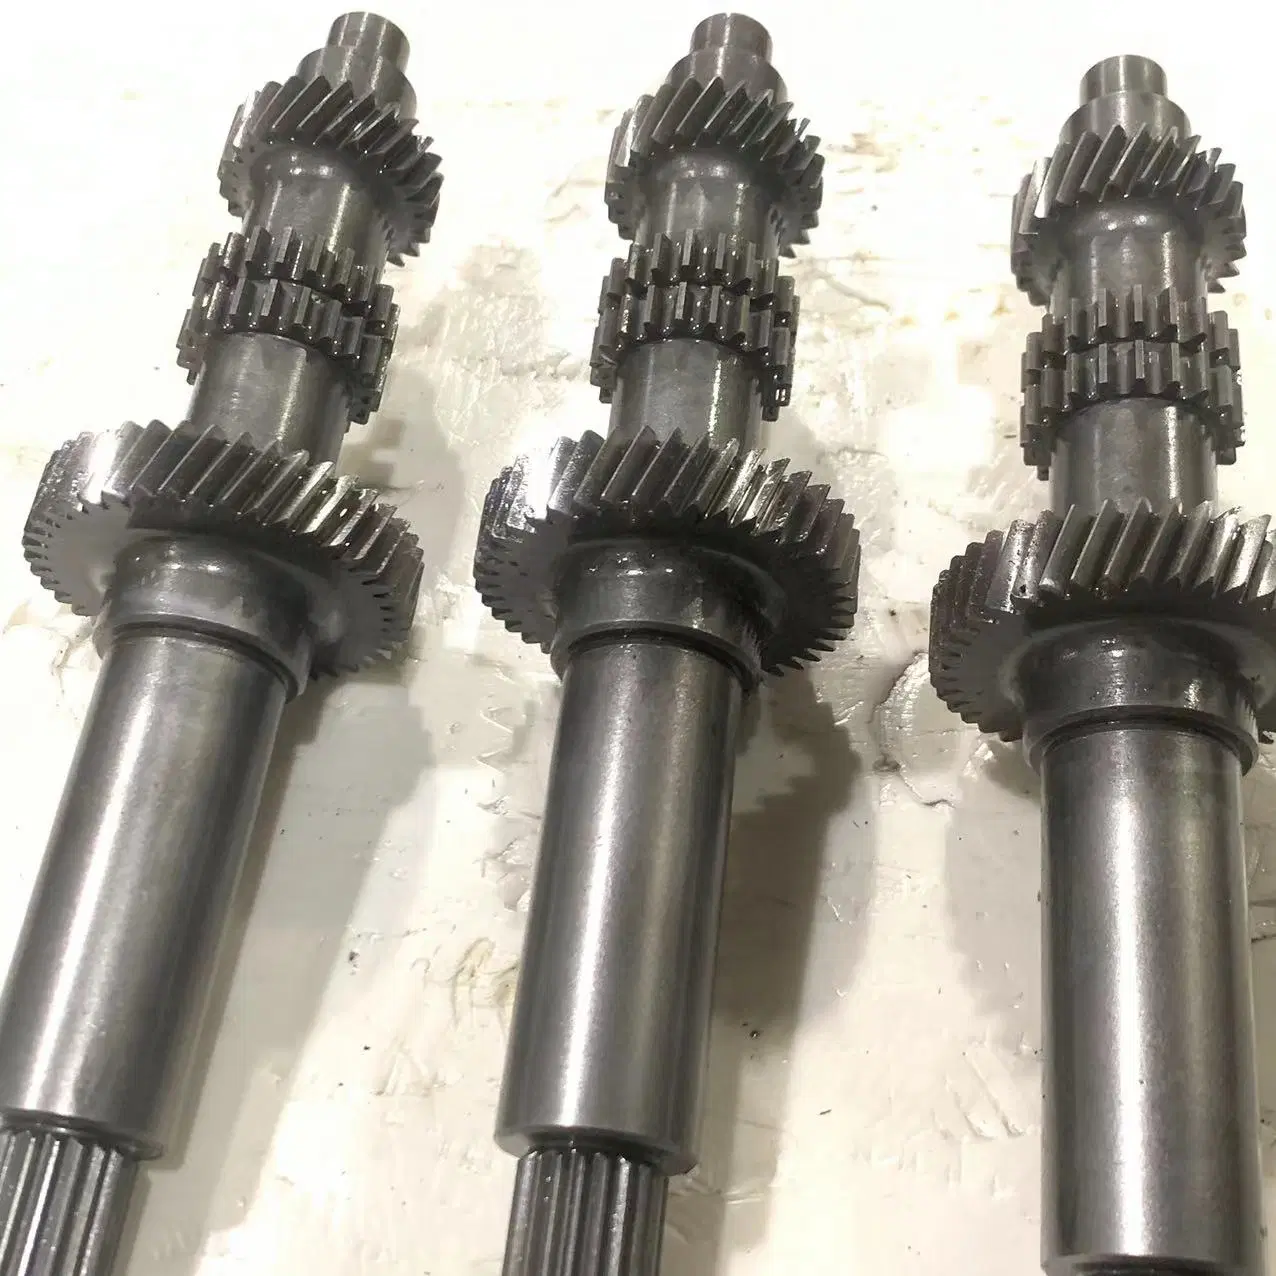 Agricultural Machinery Uses Power Transmission Shafts, Transmission Shafts, Factory Steel Precision Transmission Machinery Parts, Transmissions, Starters4